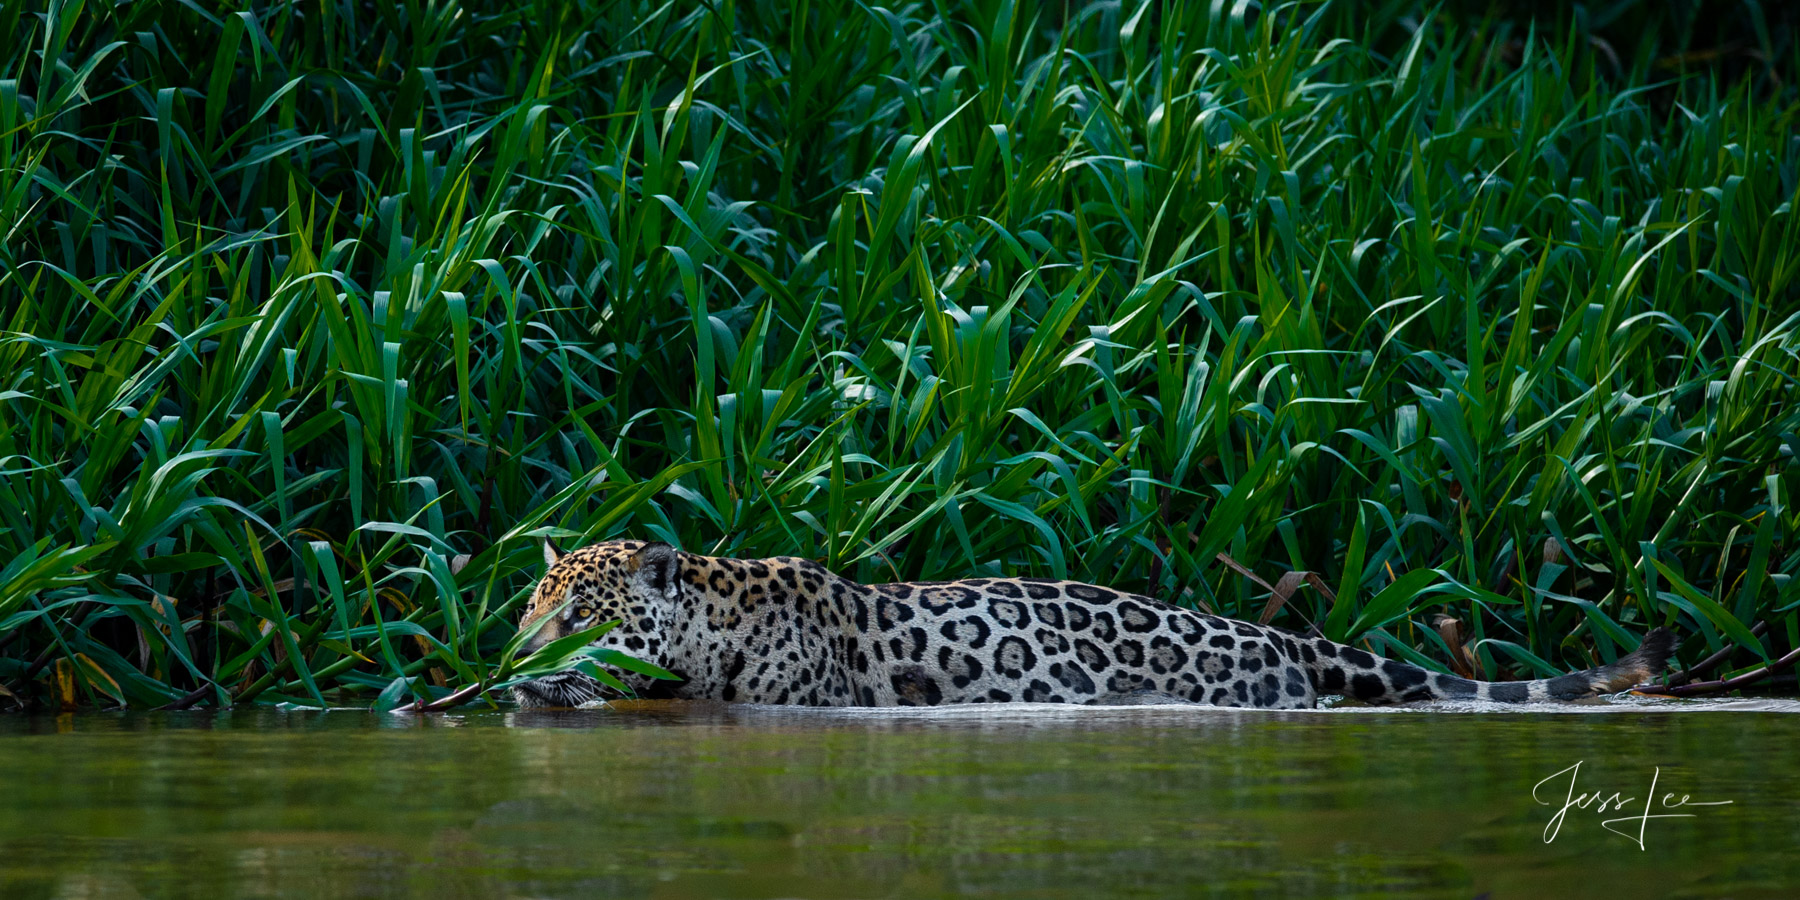 Fine art Jaguar stalking in the river print limited edition of 300 luxury prints by Jess Lee. All photographs copyright © Jess...